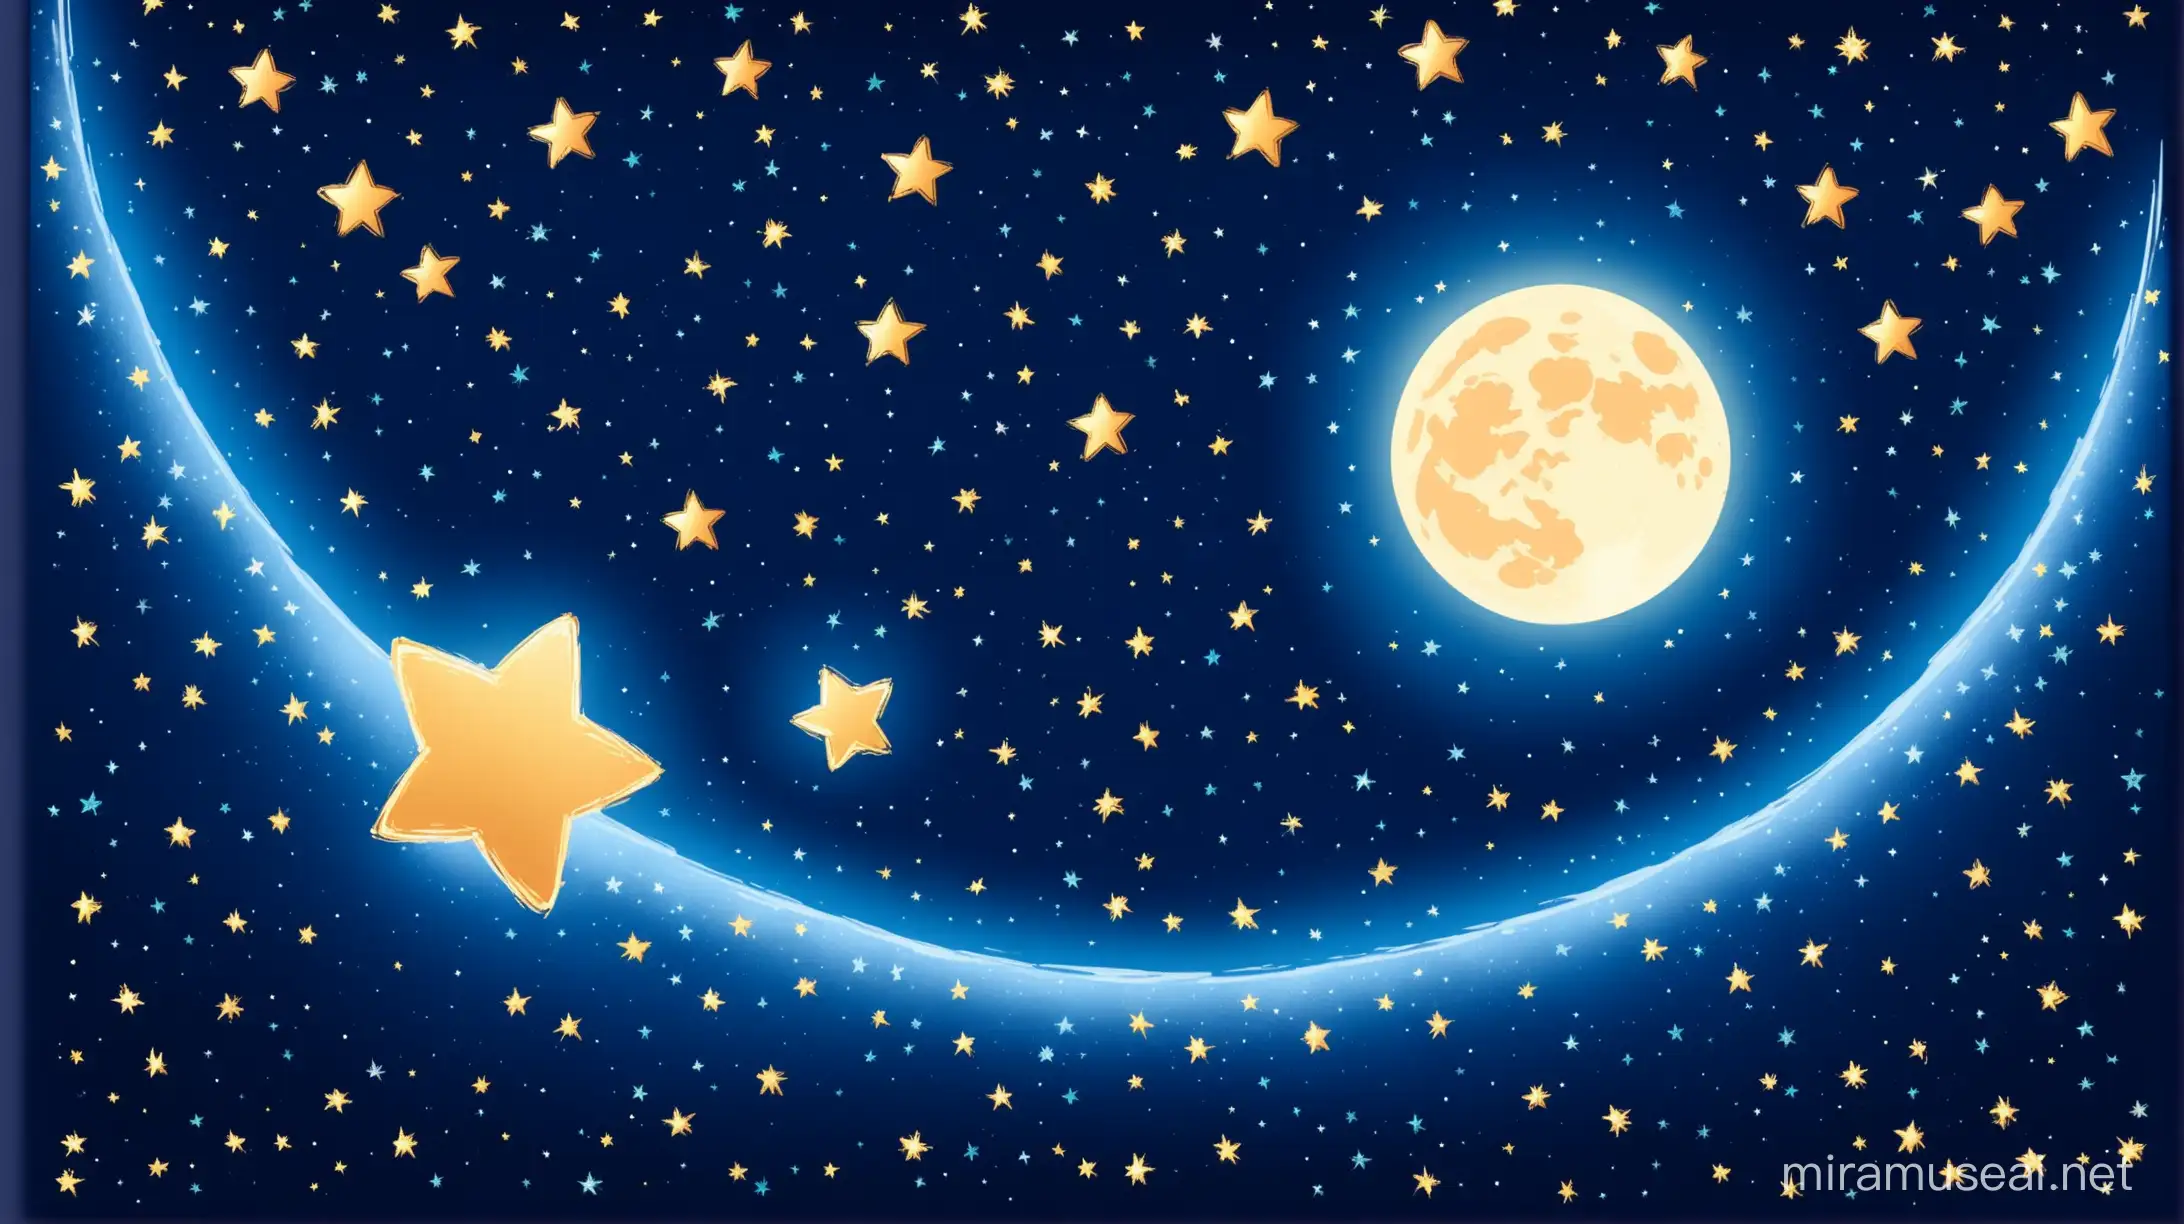 dark blue background, night sky and  little shining stars in background. close up on the five  very big shining stars on the left side of the picture and on the very big moon on the right side. Paint stylized picture. 
